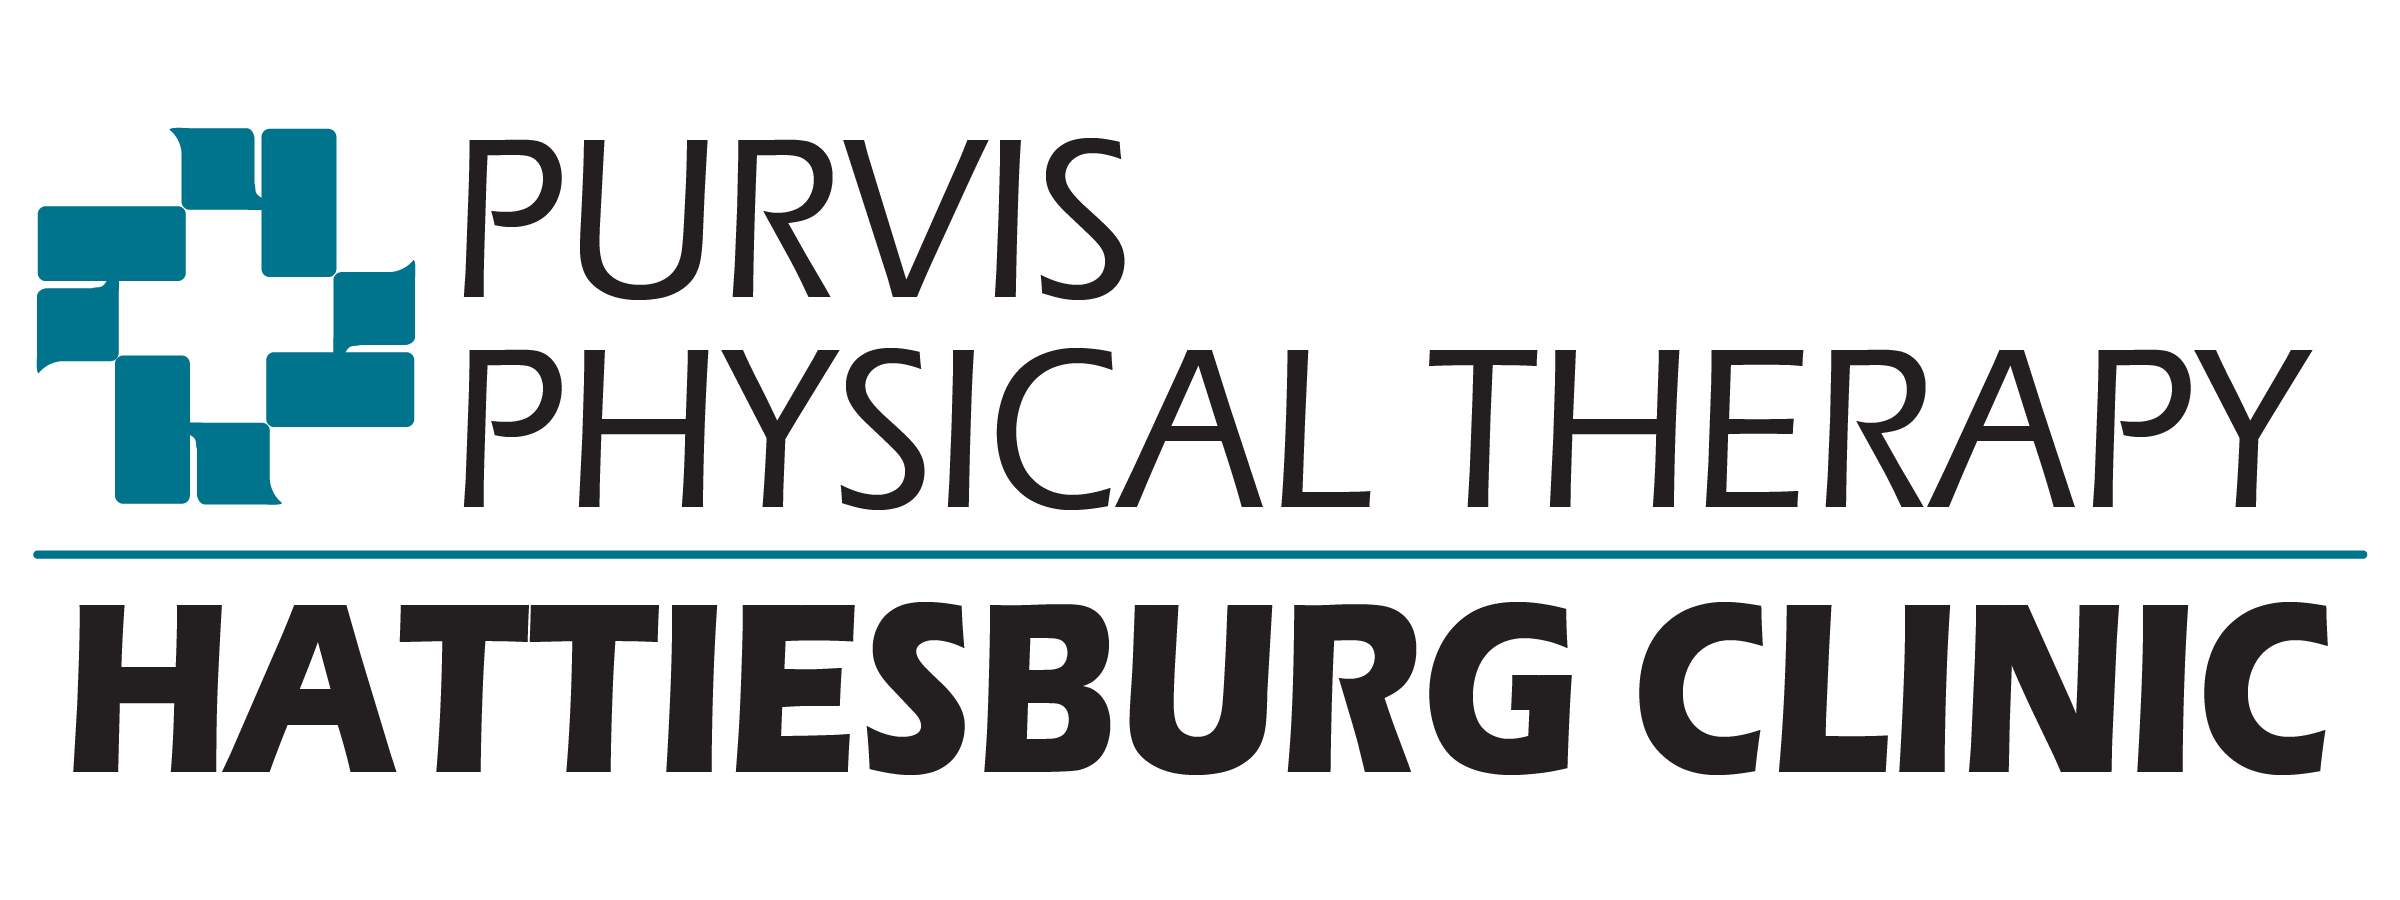 Purvis Physical Therapy logo